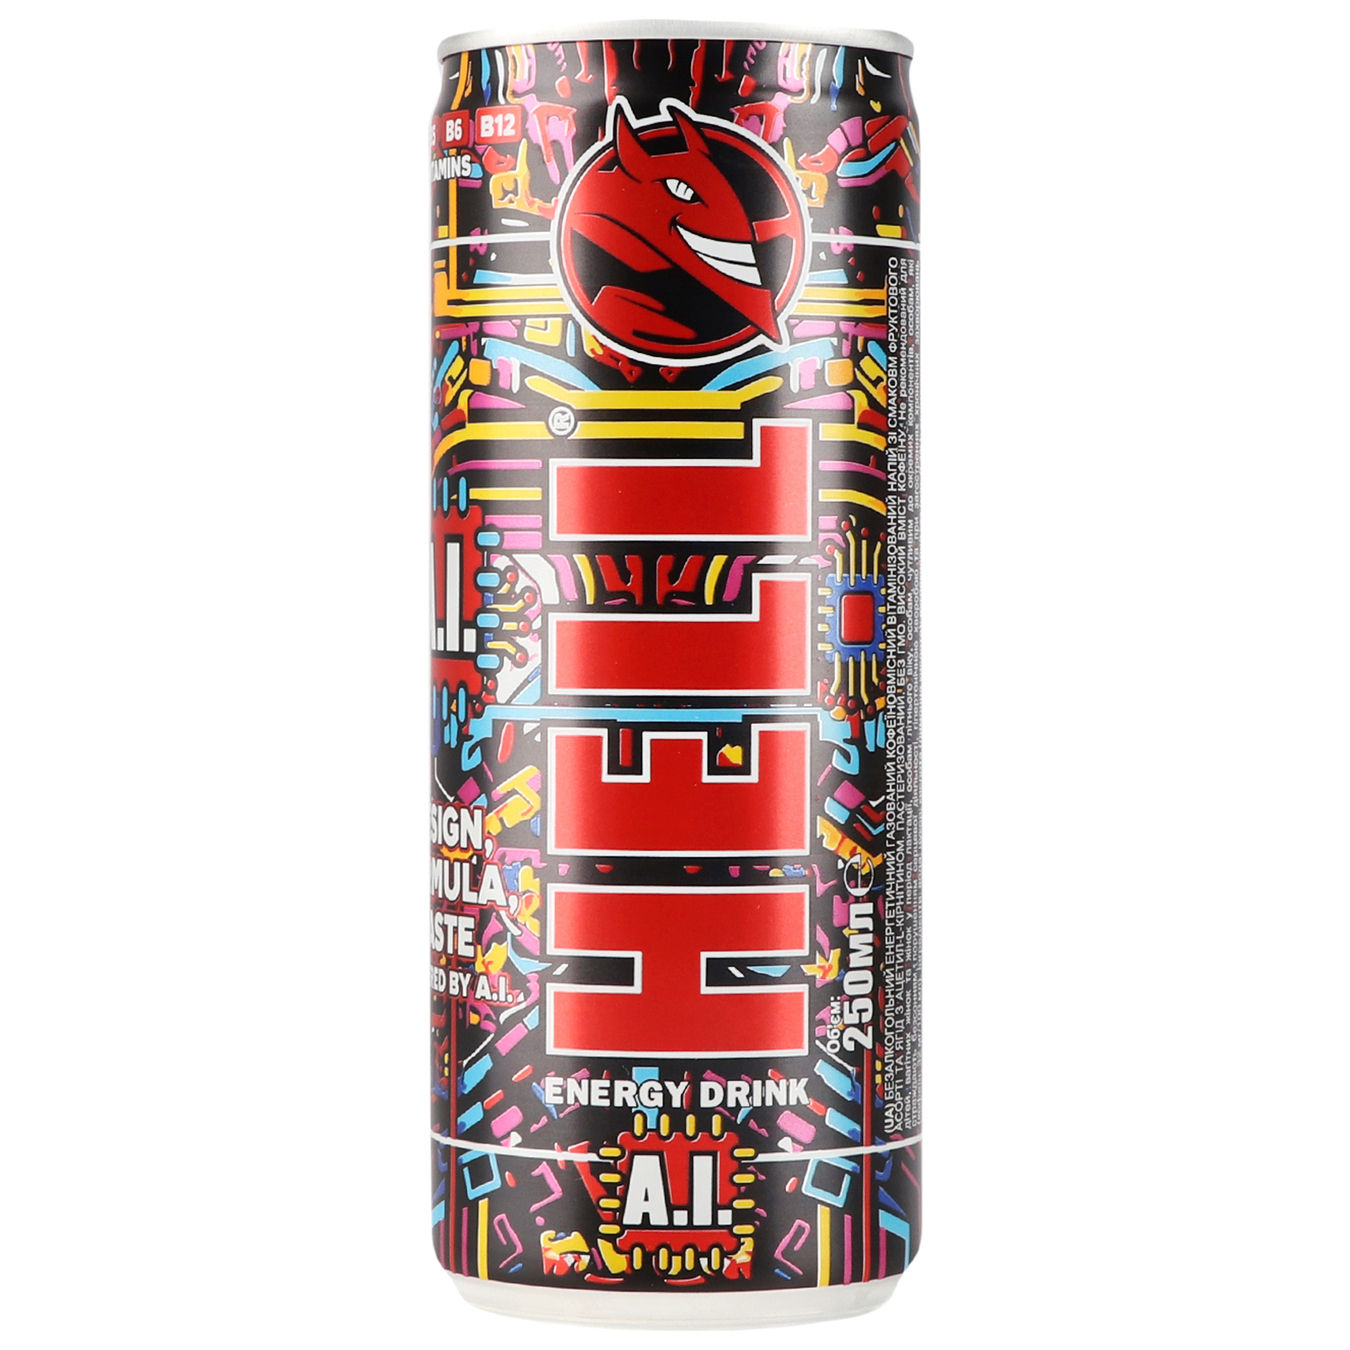 Carbonated energy drink HELL A.I. 0.25 l iron can